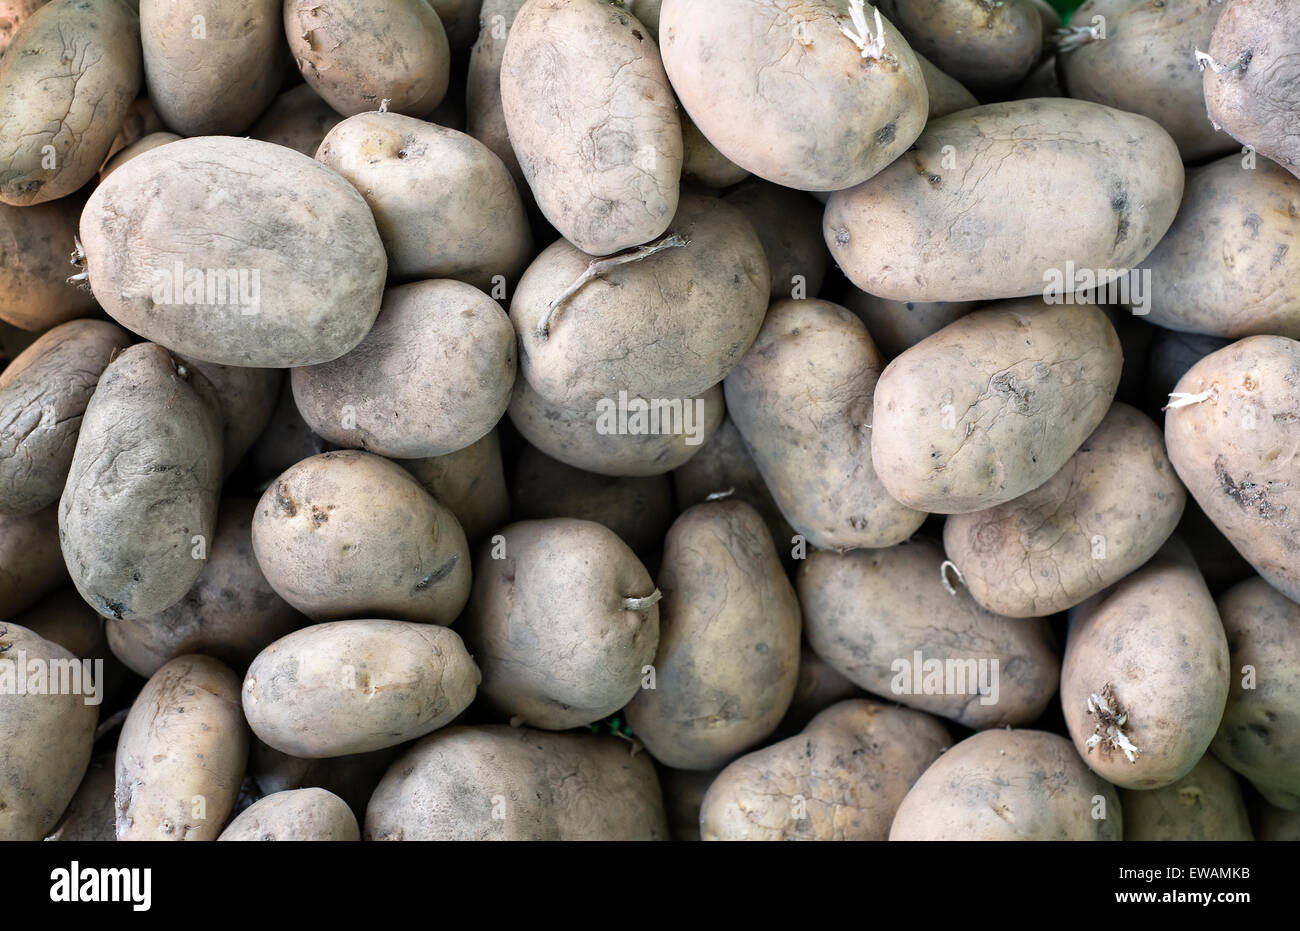 Raw potatoes background in horizontal composition Stock Photo